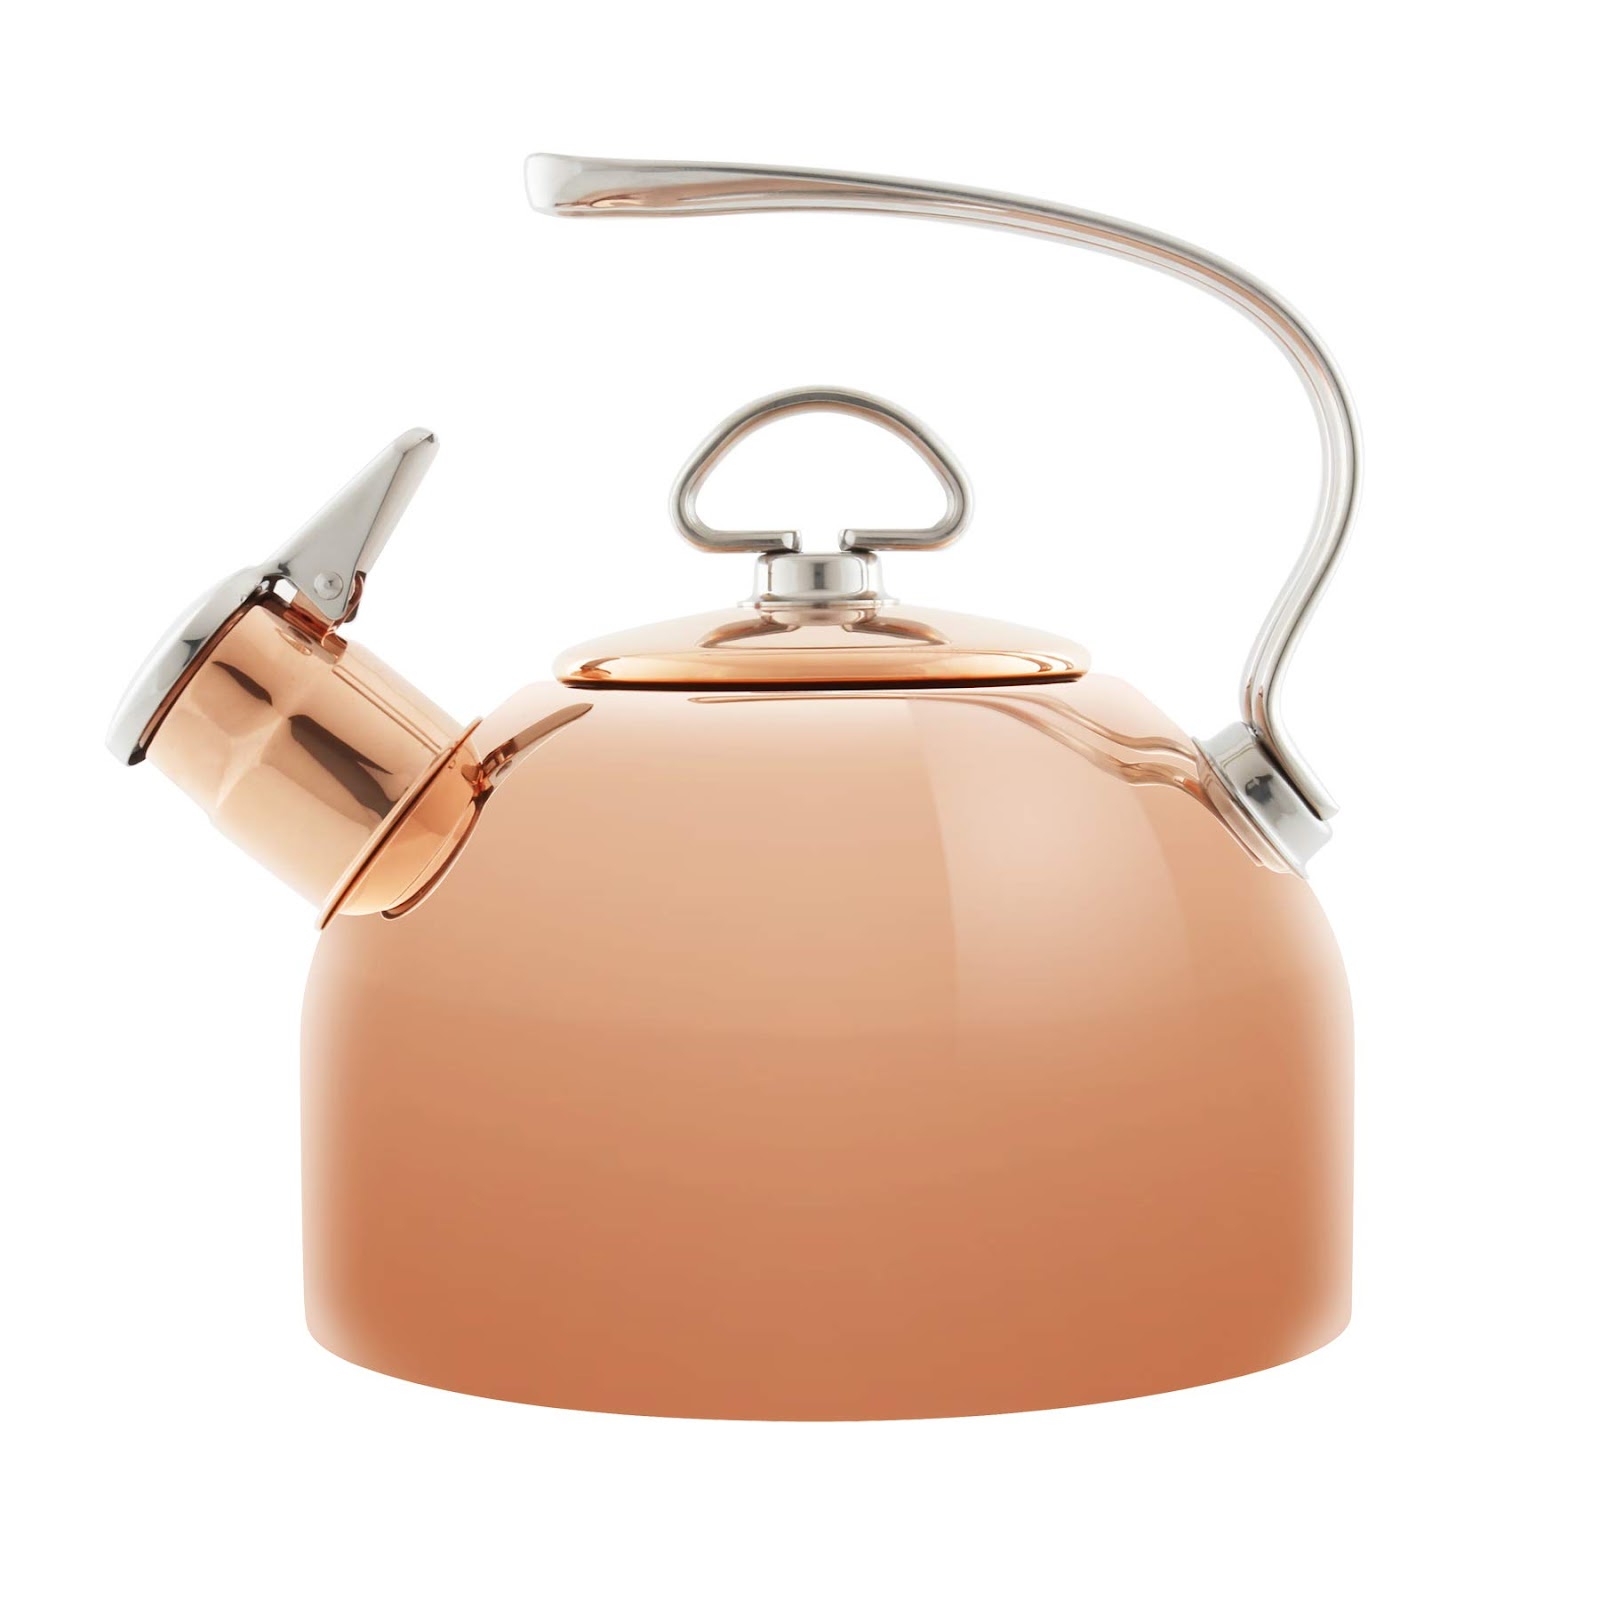 9 fancy copper kettles to buy to complement your kitchen